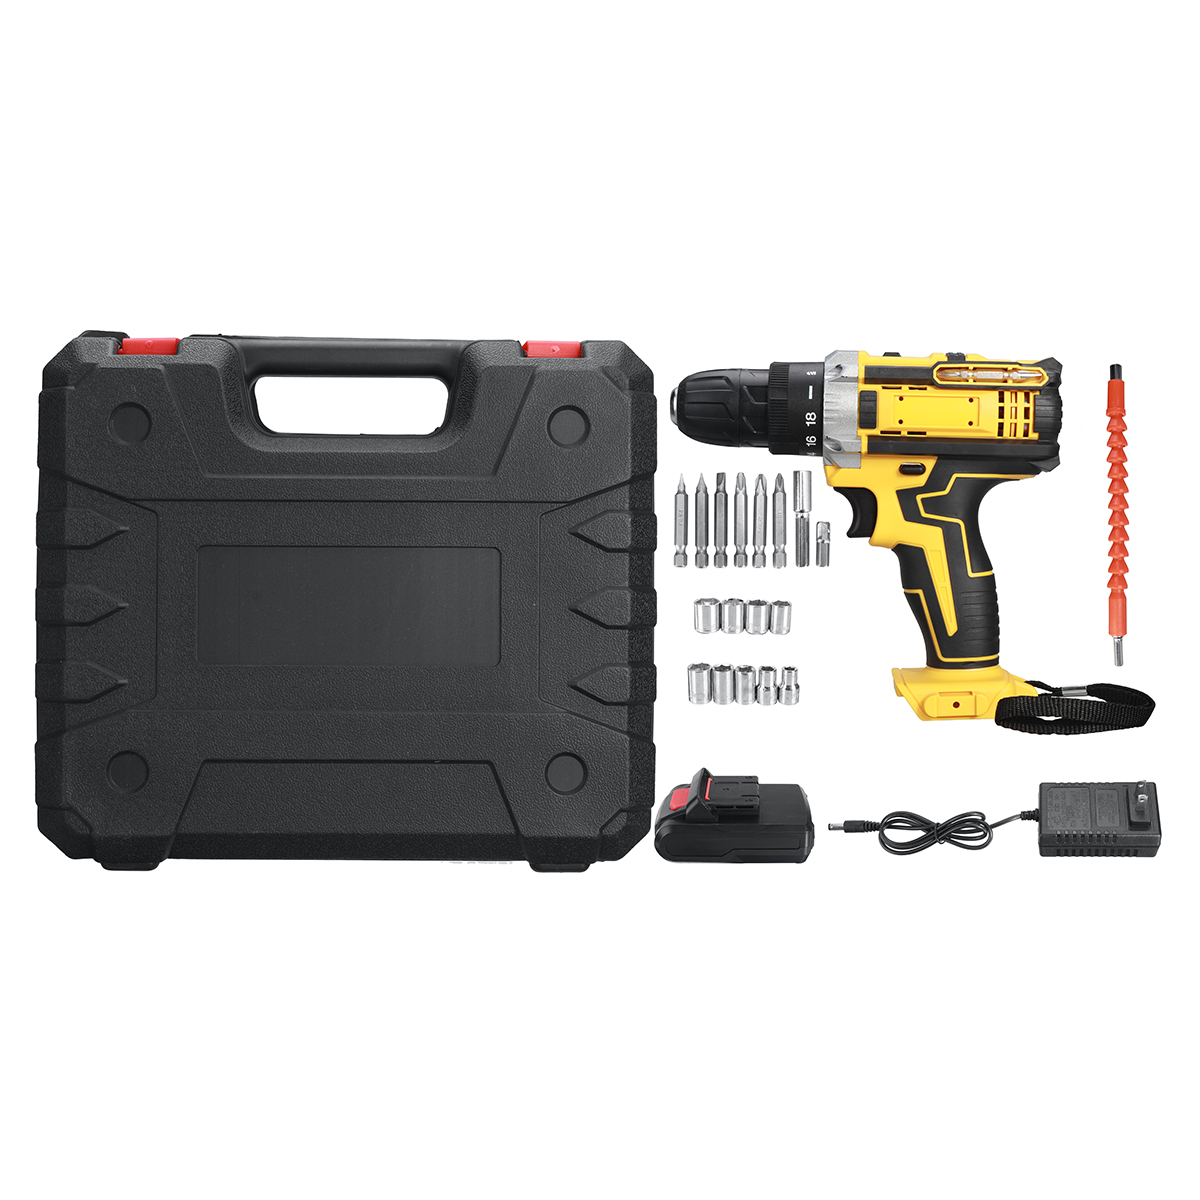 21V-Wireless-Rechargeable-Impact-Hammer-Drill-Electric-Screwdriver-W-Battery--Storage-Case-Screwing--1858203-15